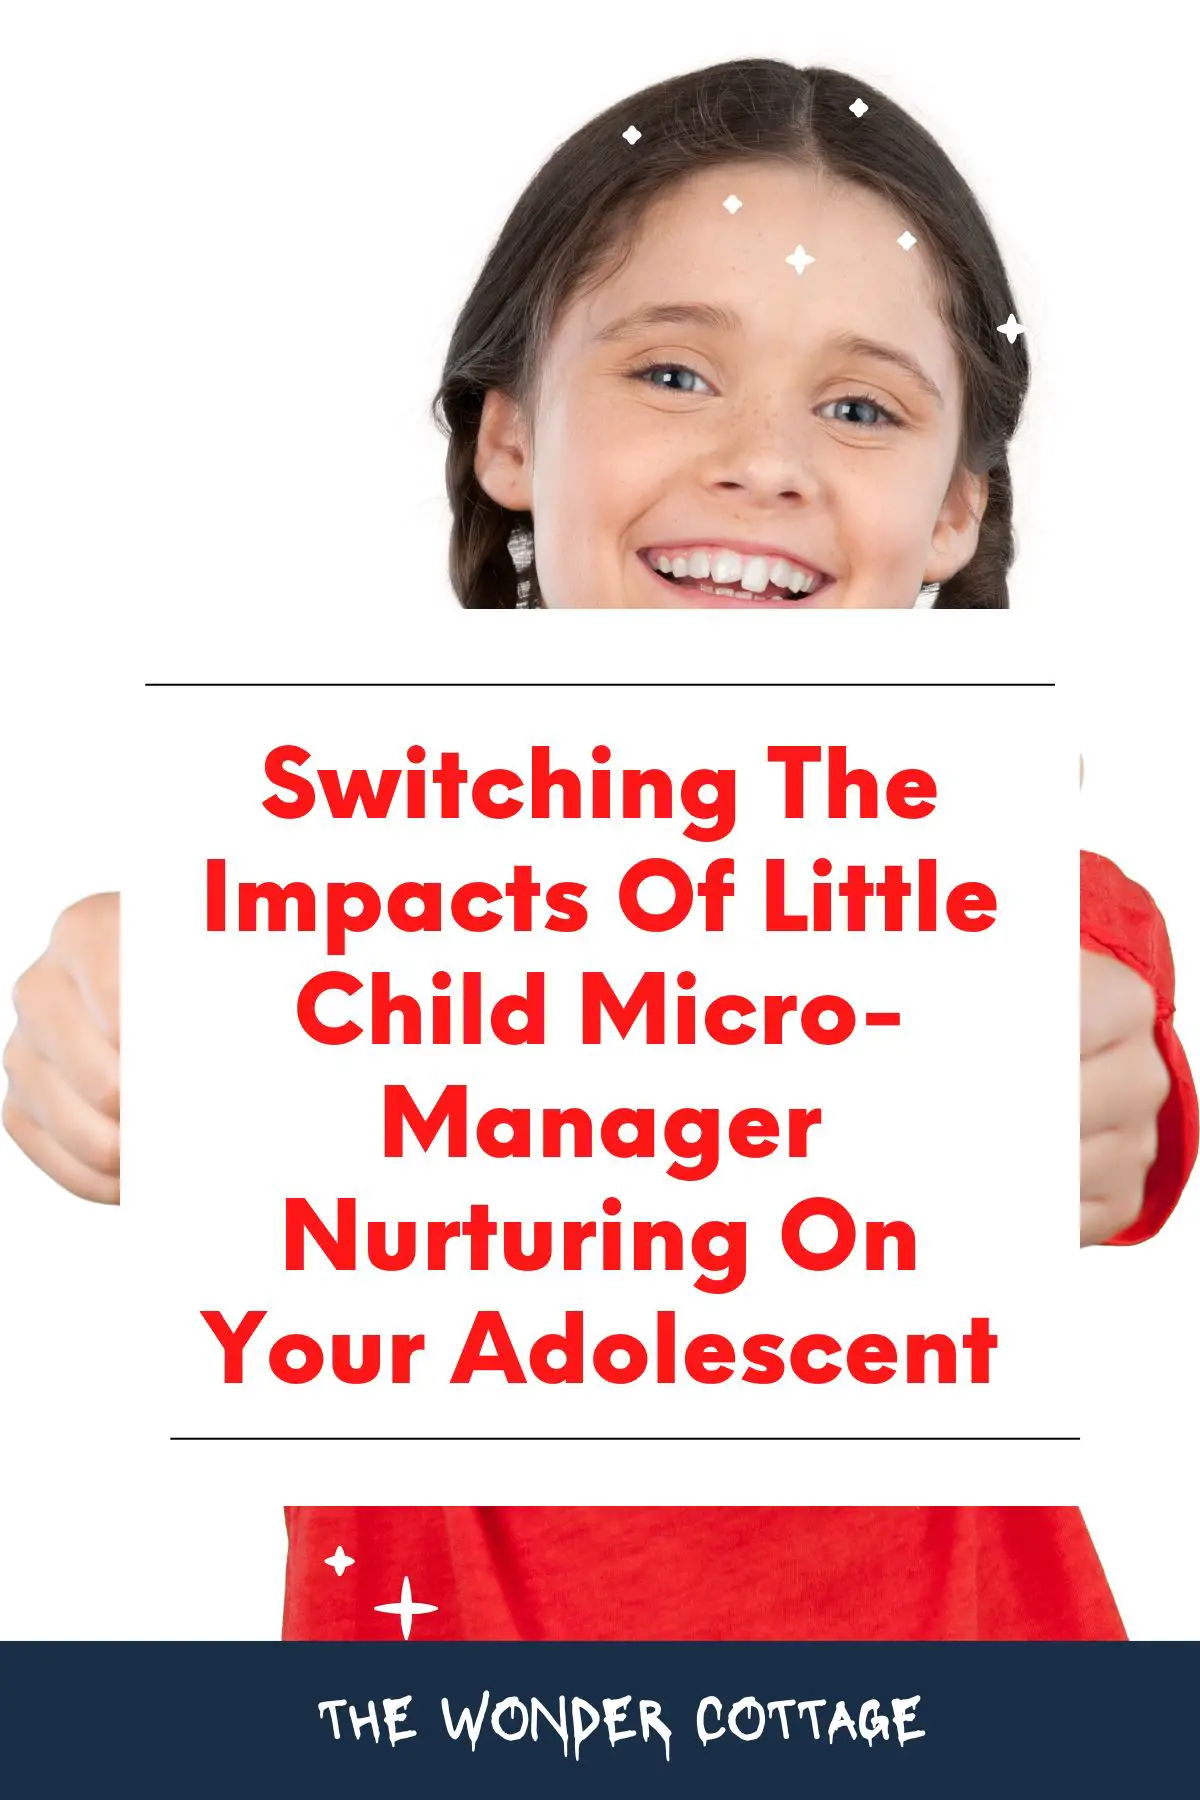 Switching The Impacts Of Little Child Micro-Manager Nurturing On Your Adolescent